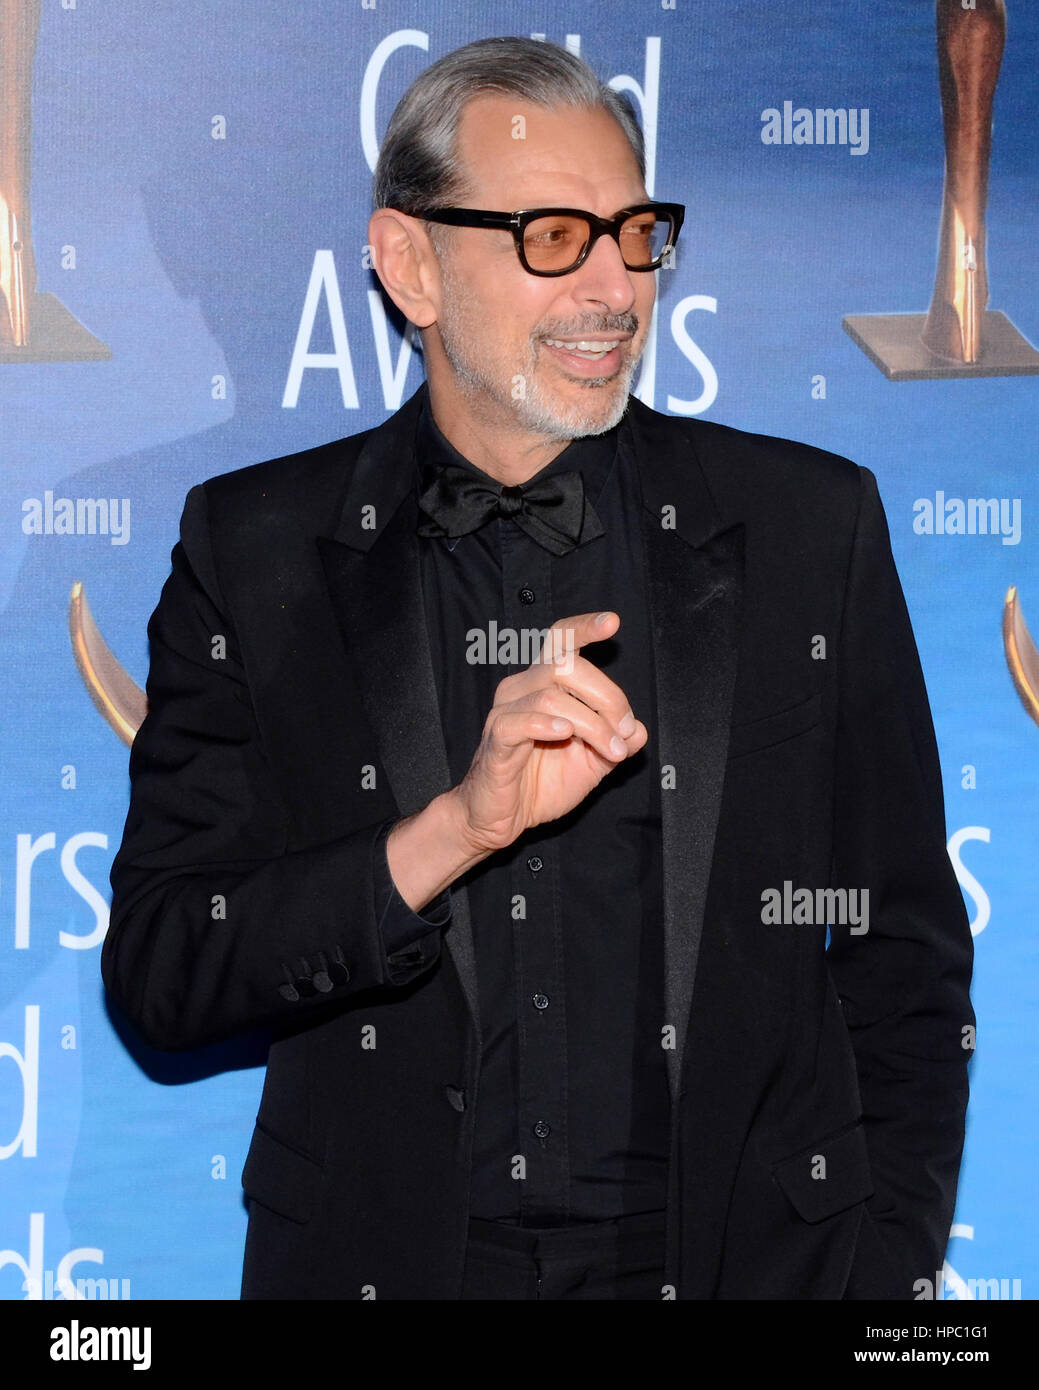 Jeff Goldblum attend the 2017 Writers Guild Awards L.A. Ceremony at The Beverly Hilton Hotel in Beverly Hills, California on February 19, 2017. Stock Photo